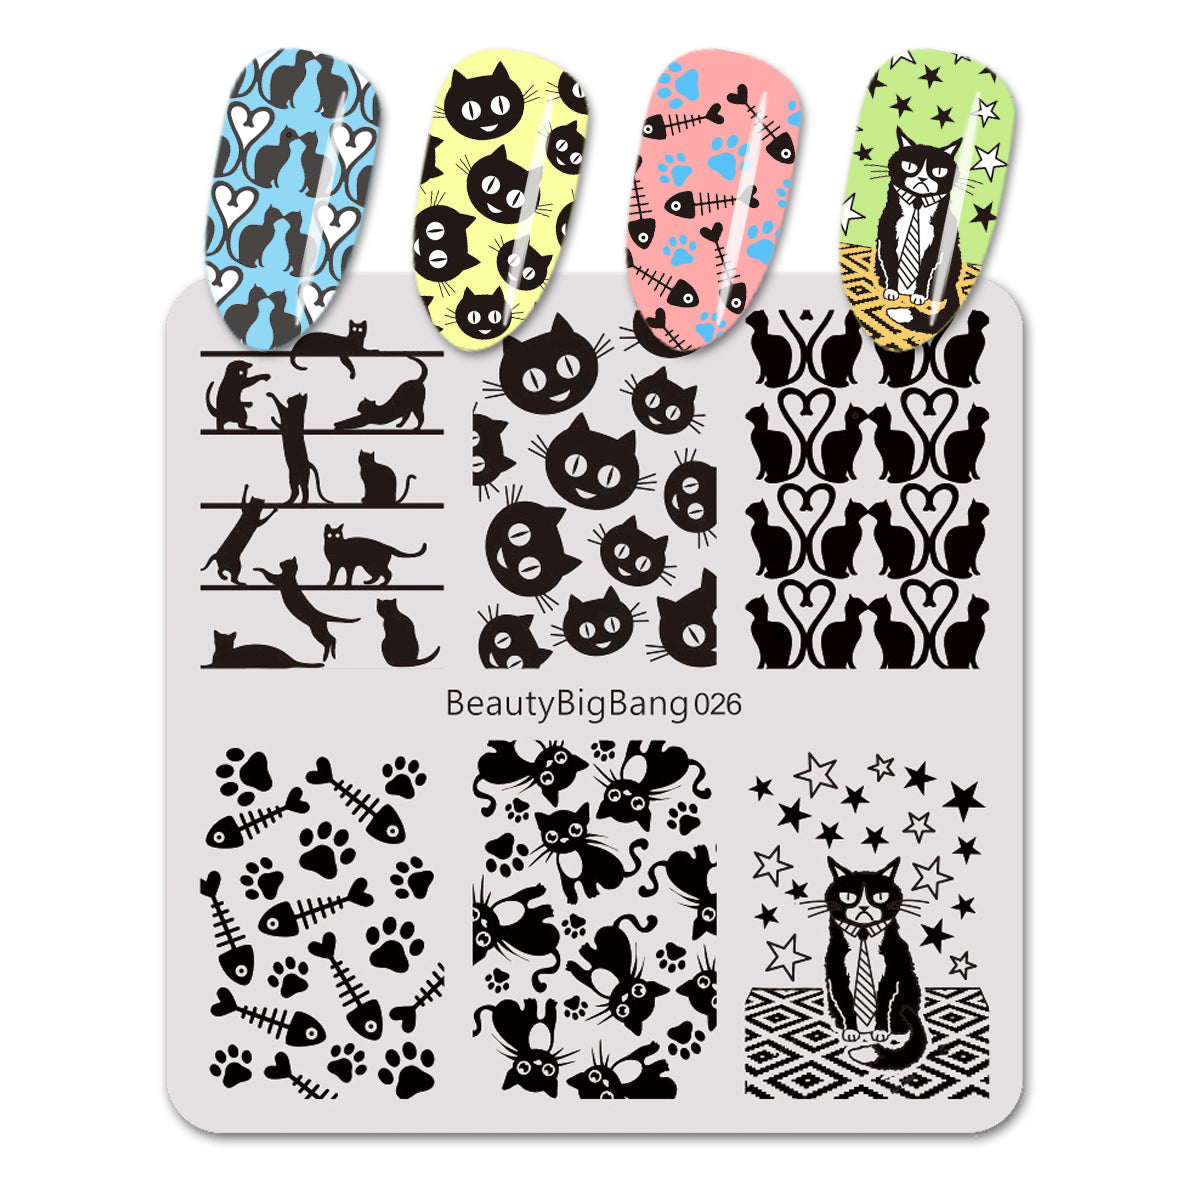 Animal Theme Cat Design Square Nail Art Stamping Plate For Manicure BB ...